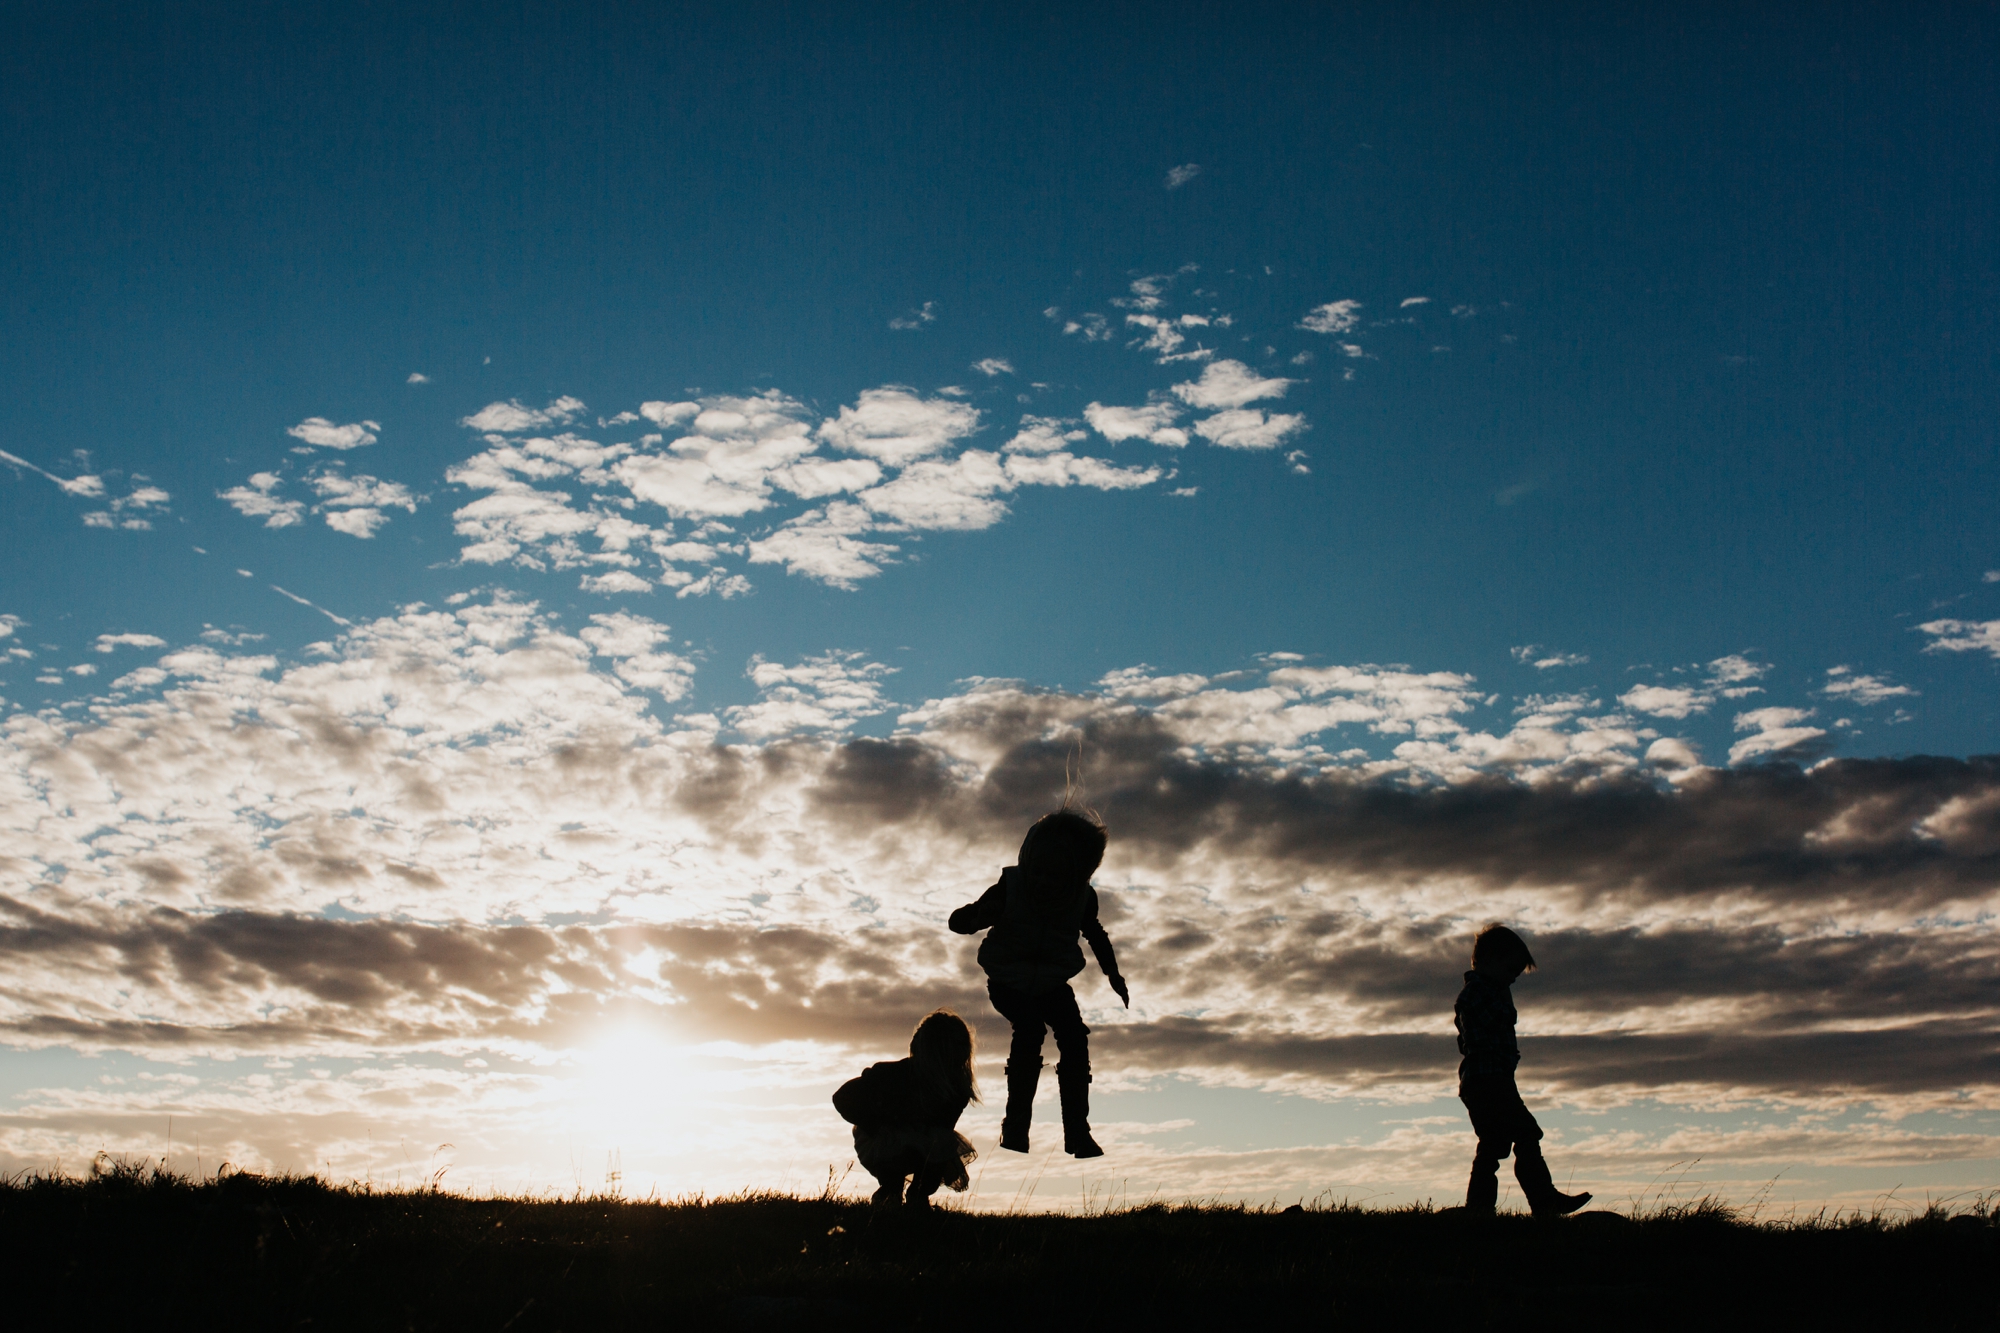 Children silhouetted against the sky in rural South Dakota.